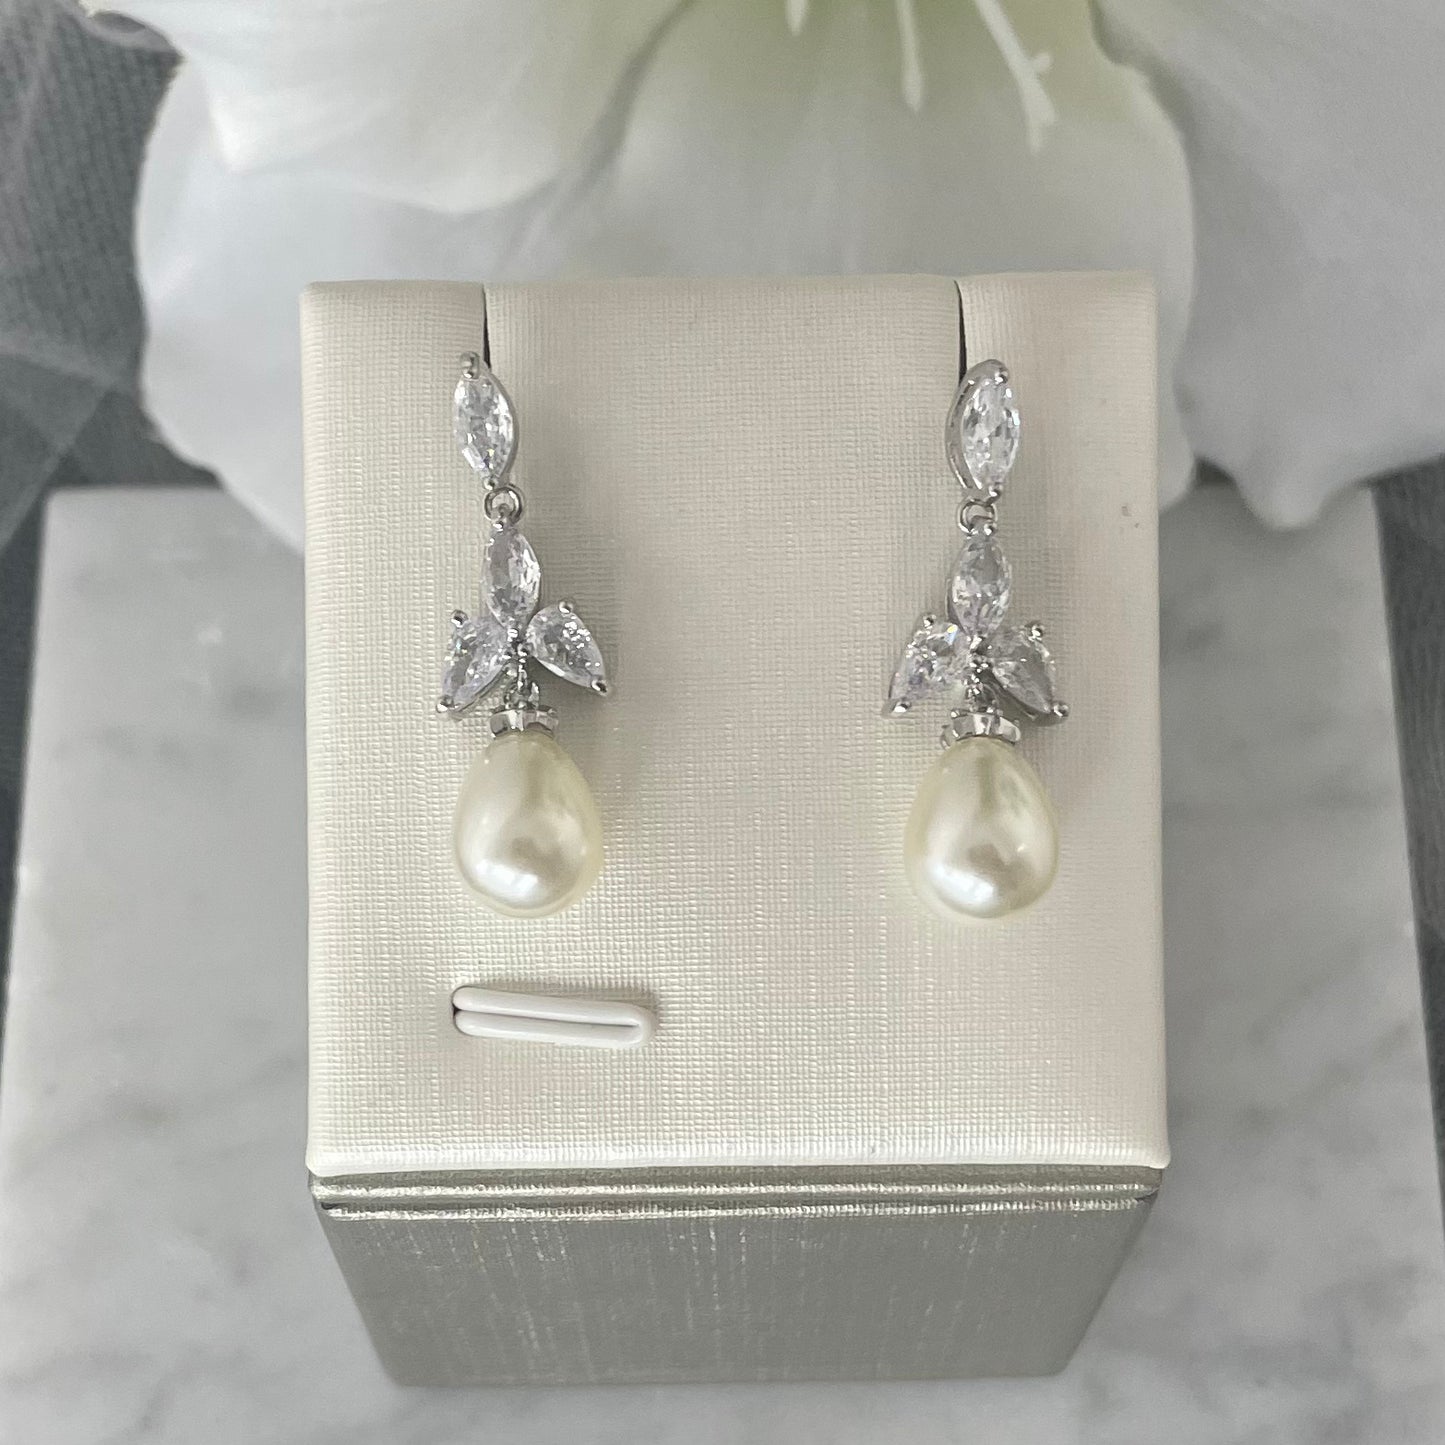 Ellet Bridal Earrings featuring CZ Stone Cluster and Freshwater Pearl Drop in Silver - Divine Bridal